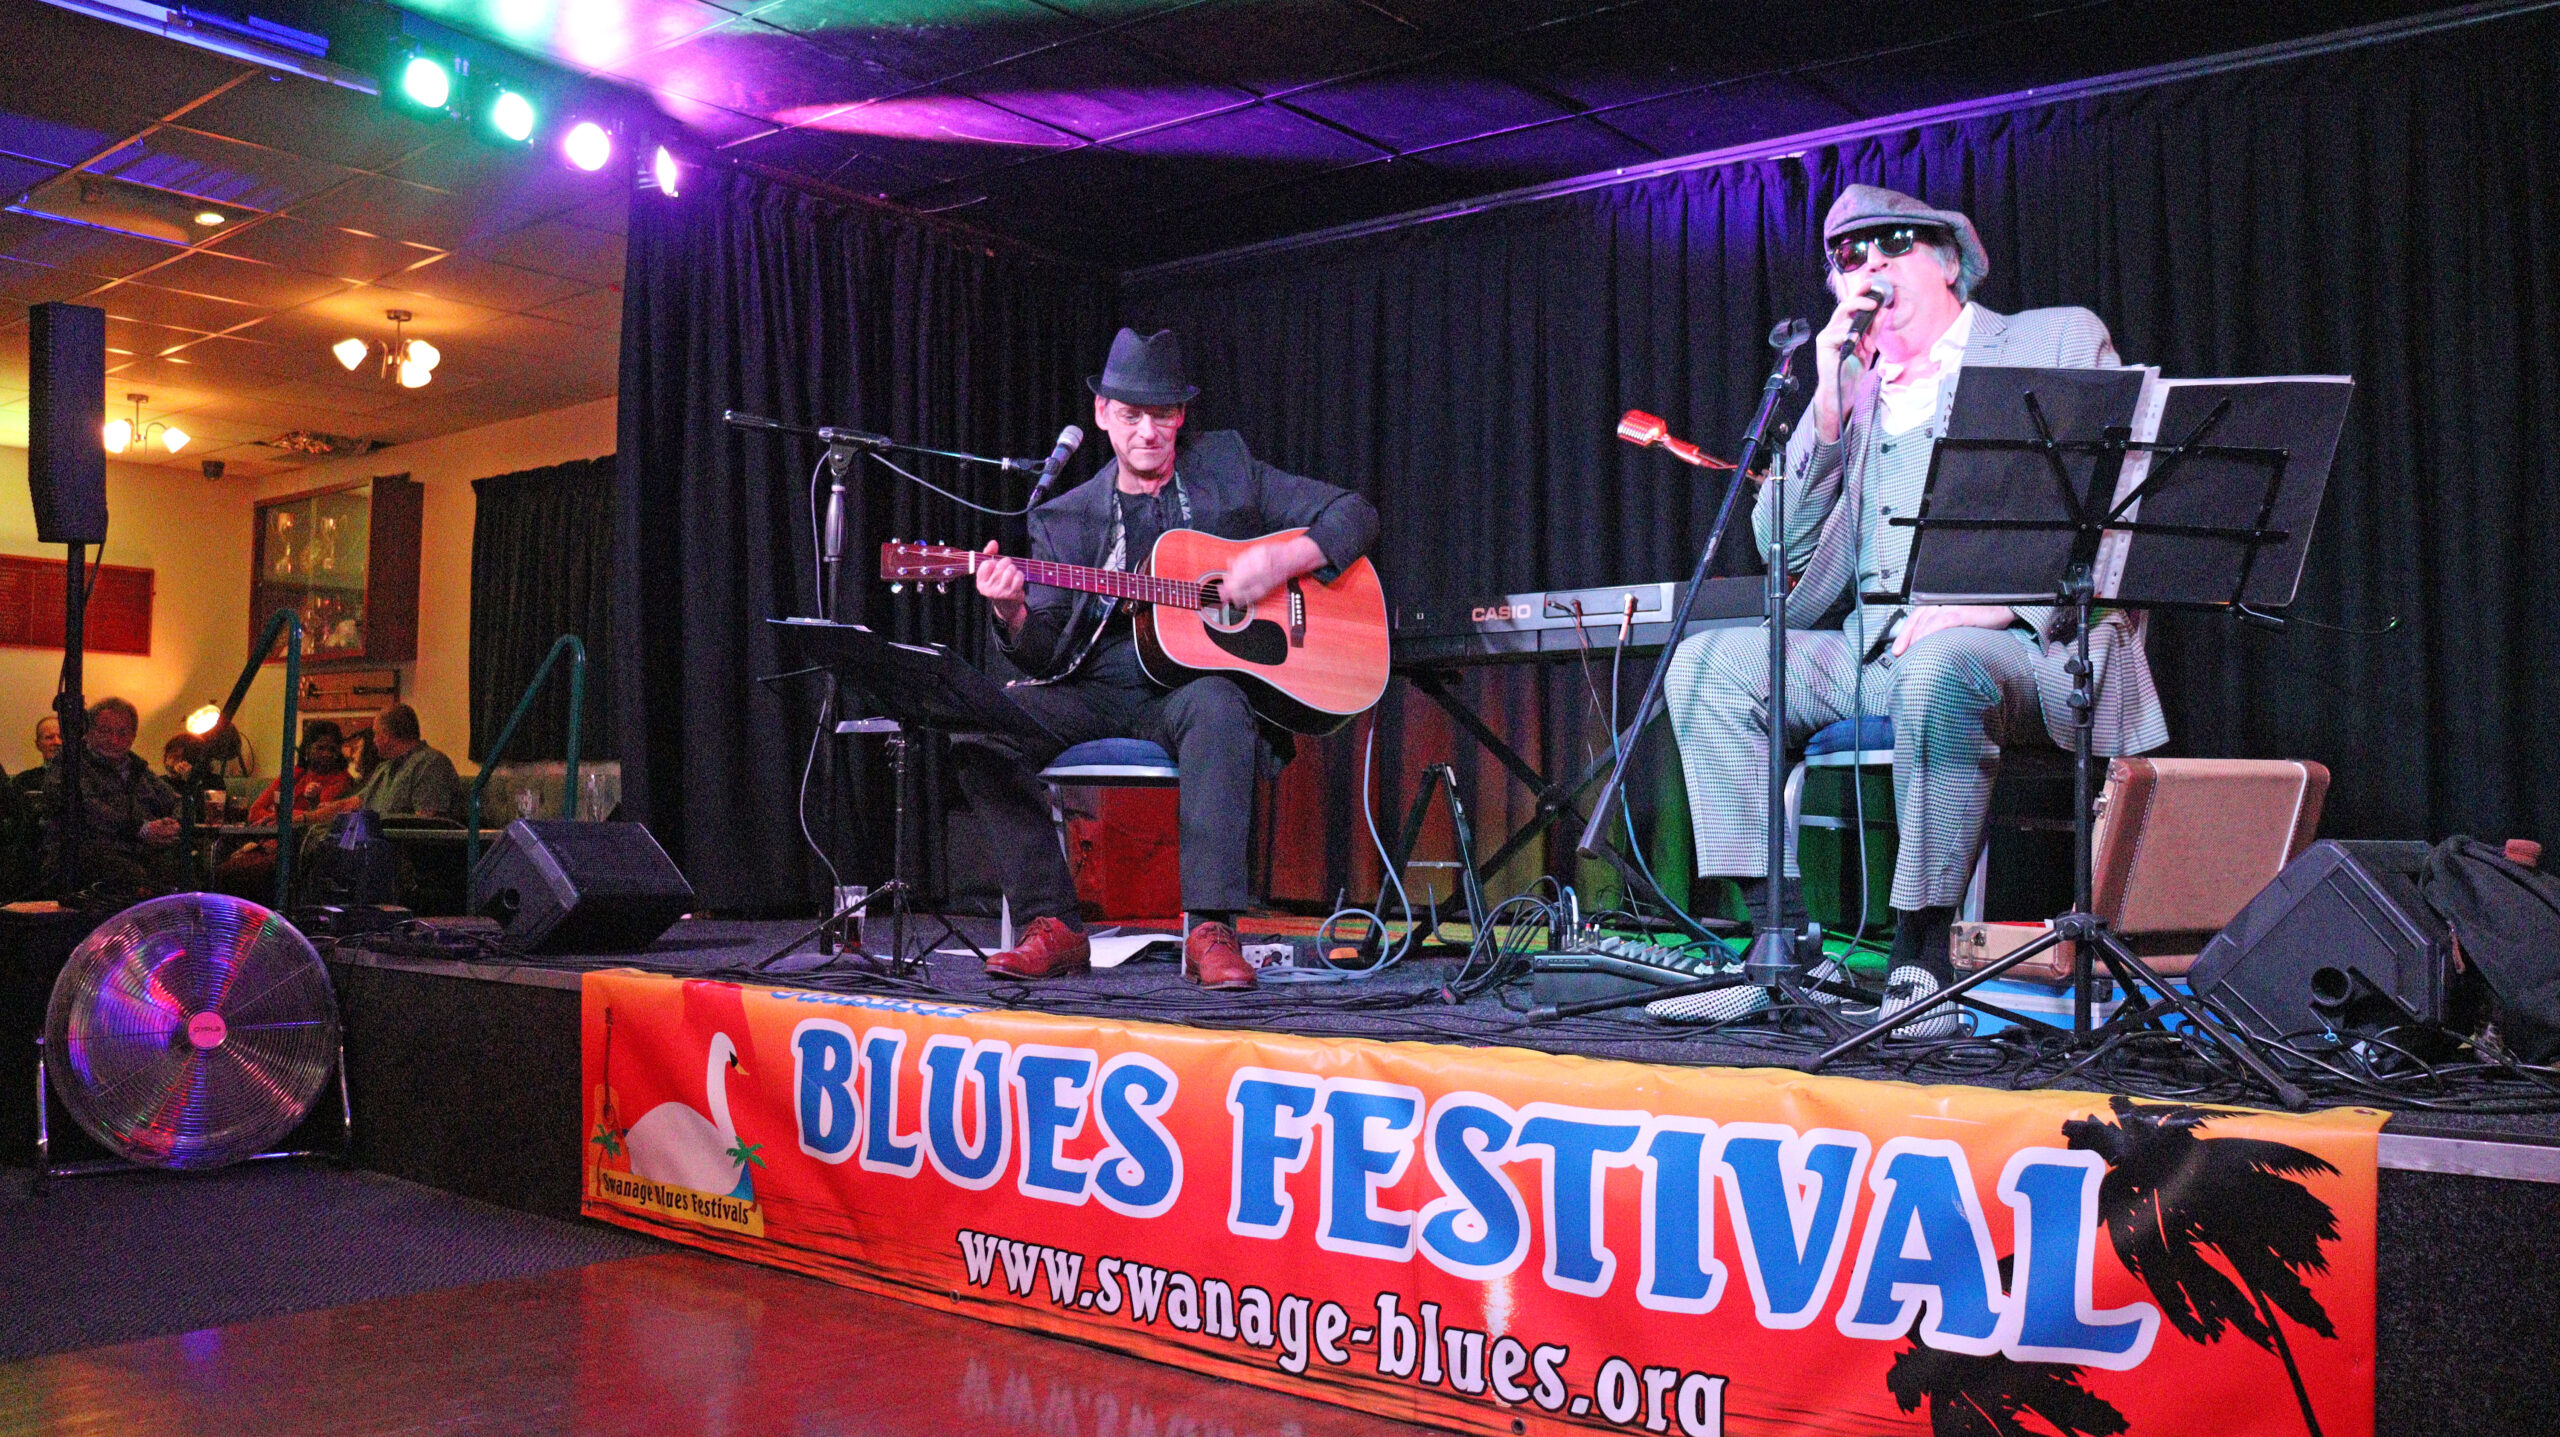 Hugh Budden and Andy Stone at the Blues Festival March 2020